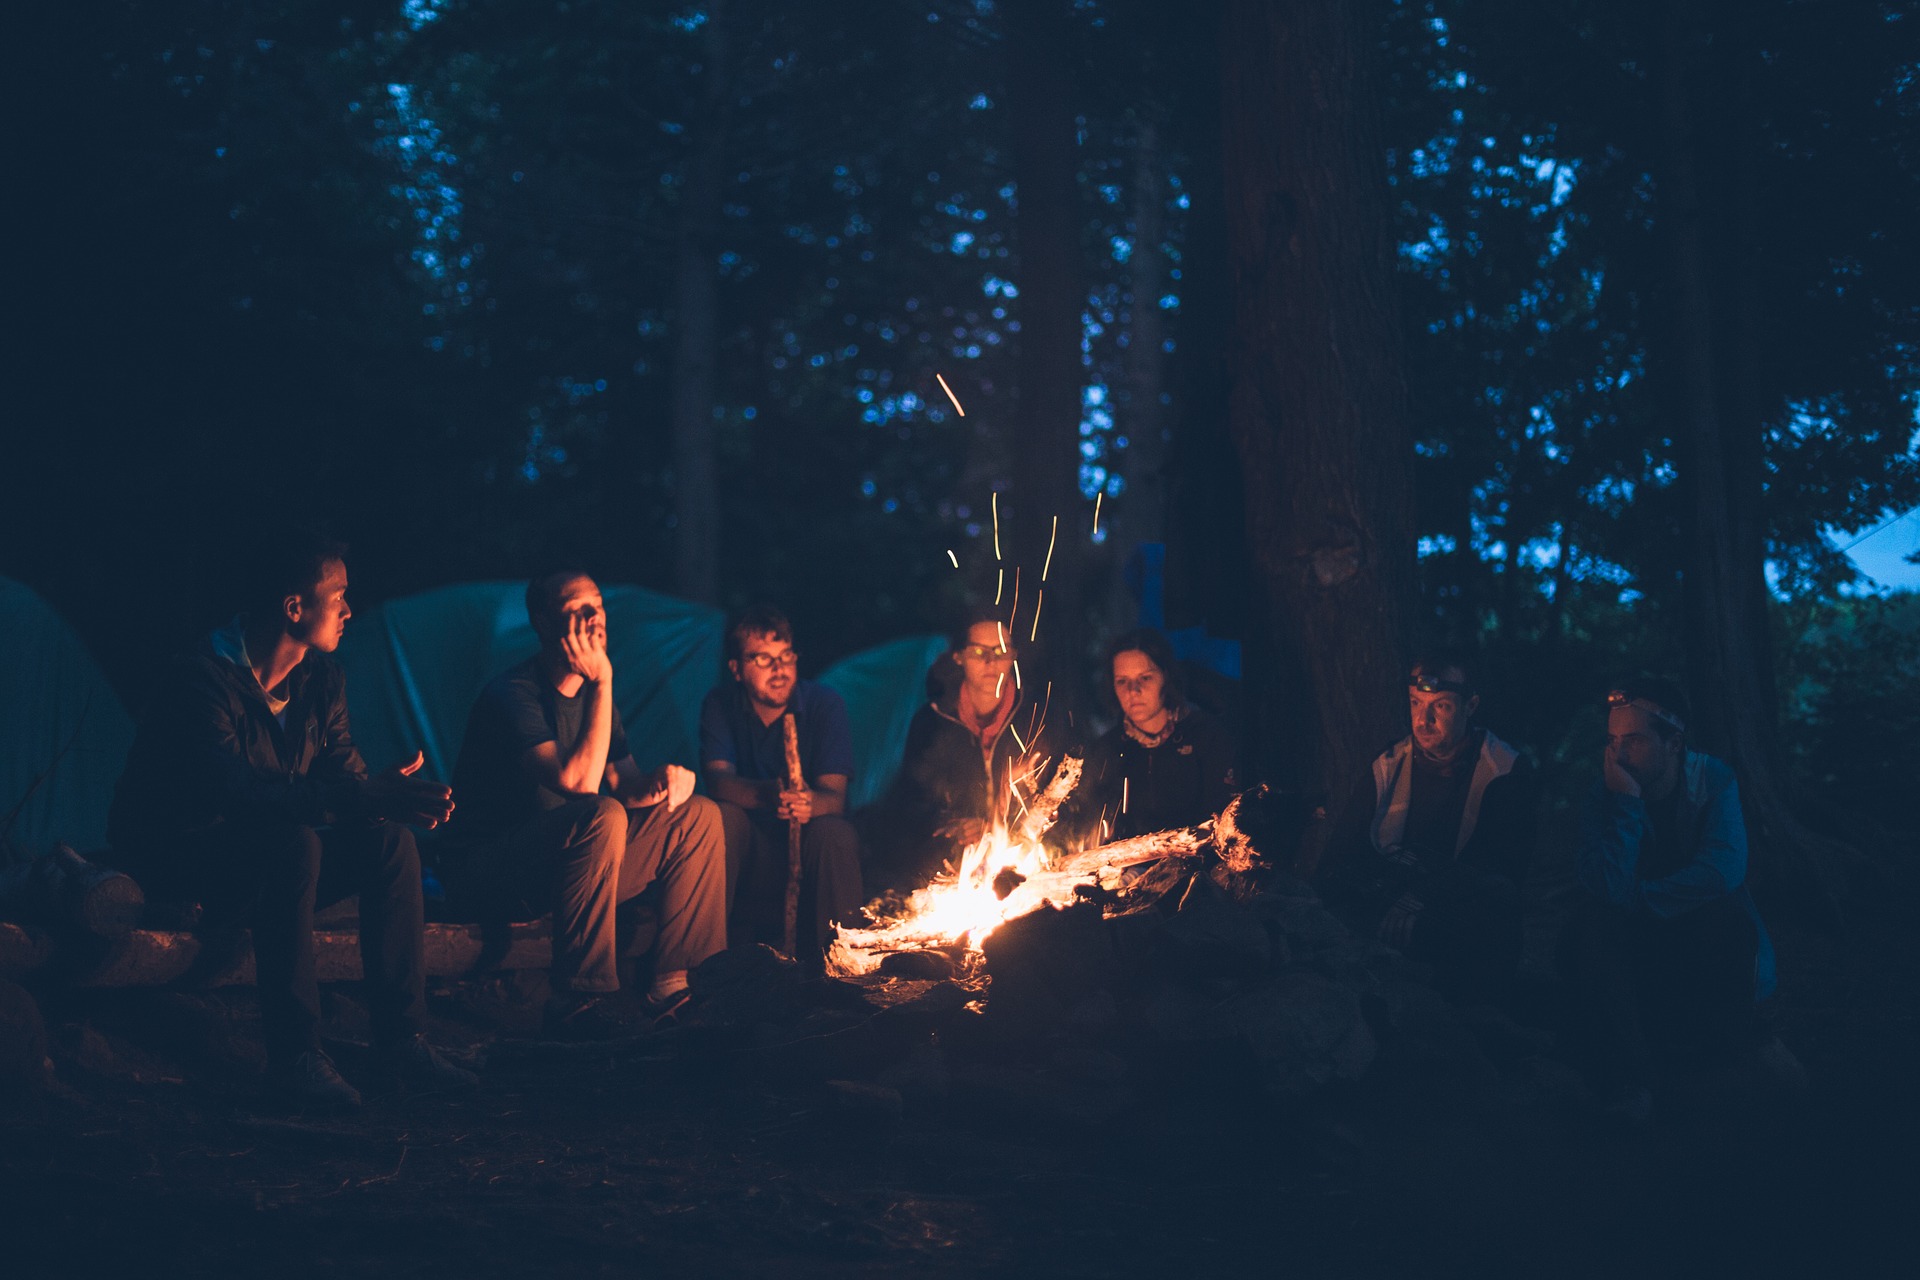 A group of people gathered around a campfire